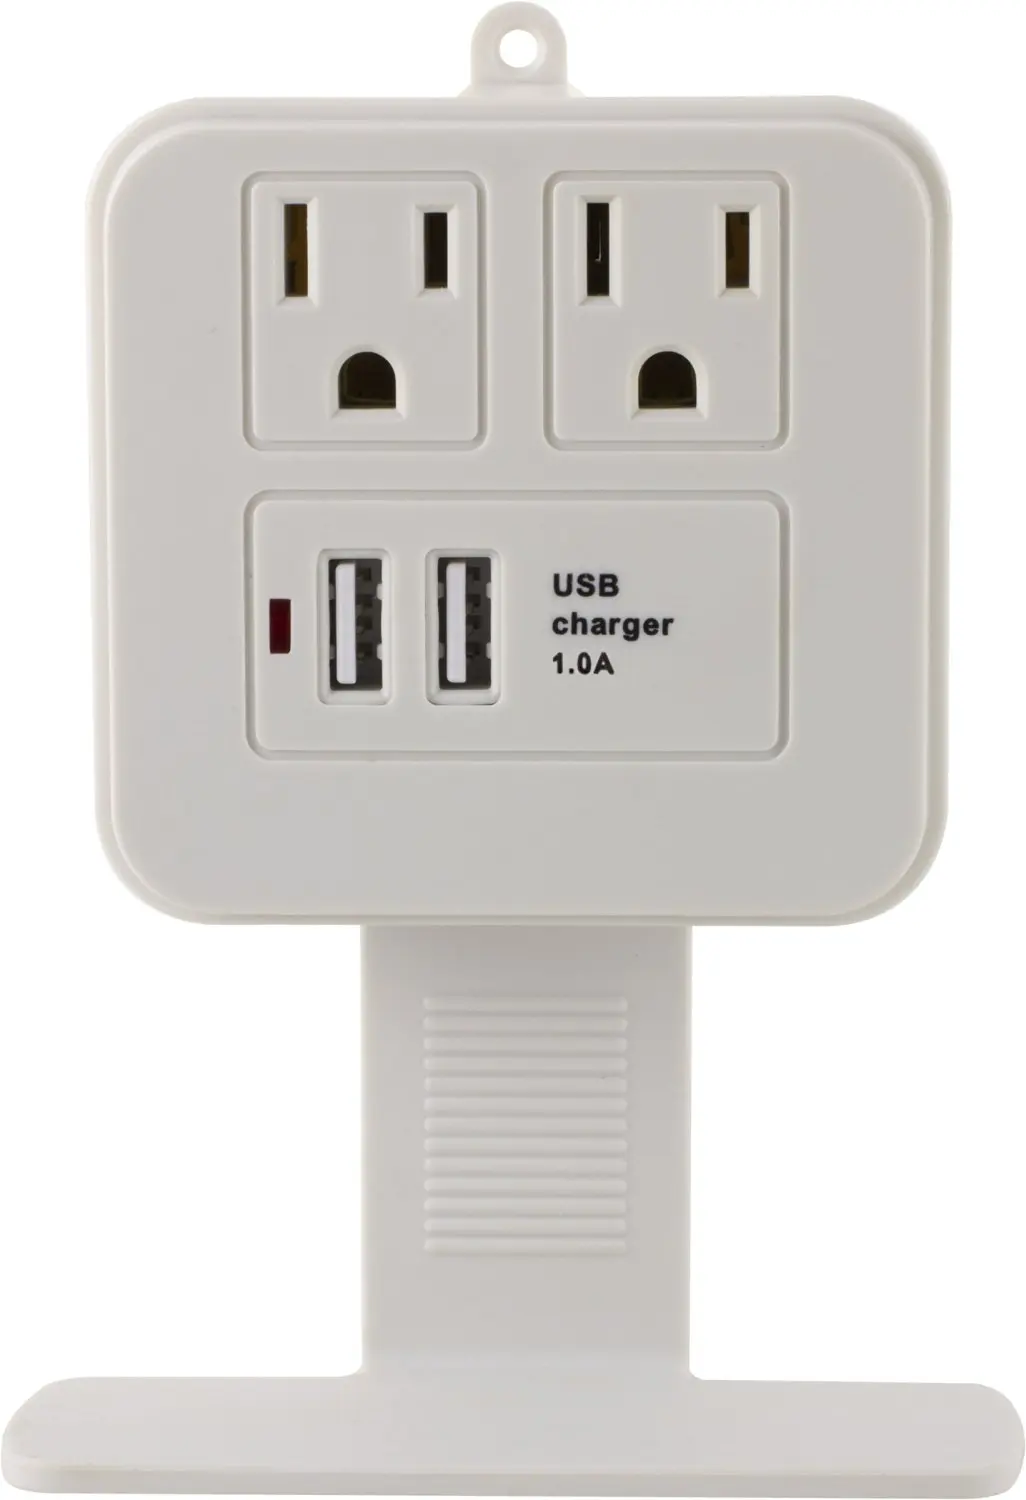 Outlet 2. 6. Wall Charger, Surge Protector - 2 шт - $22.99. Surge Protector with Shelf. Old Siemens Multi-tap Outlet Box. Vec-245-USB.